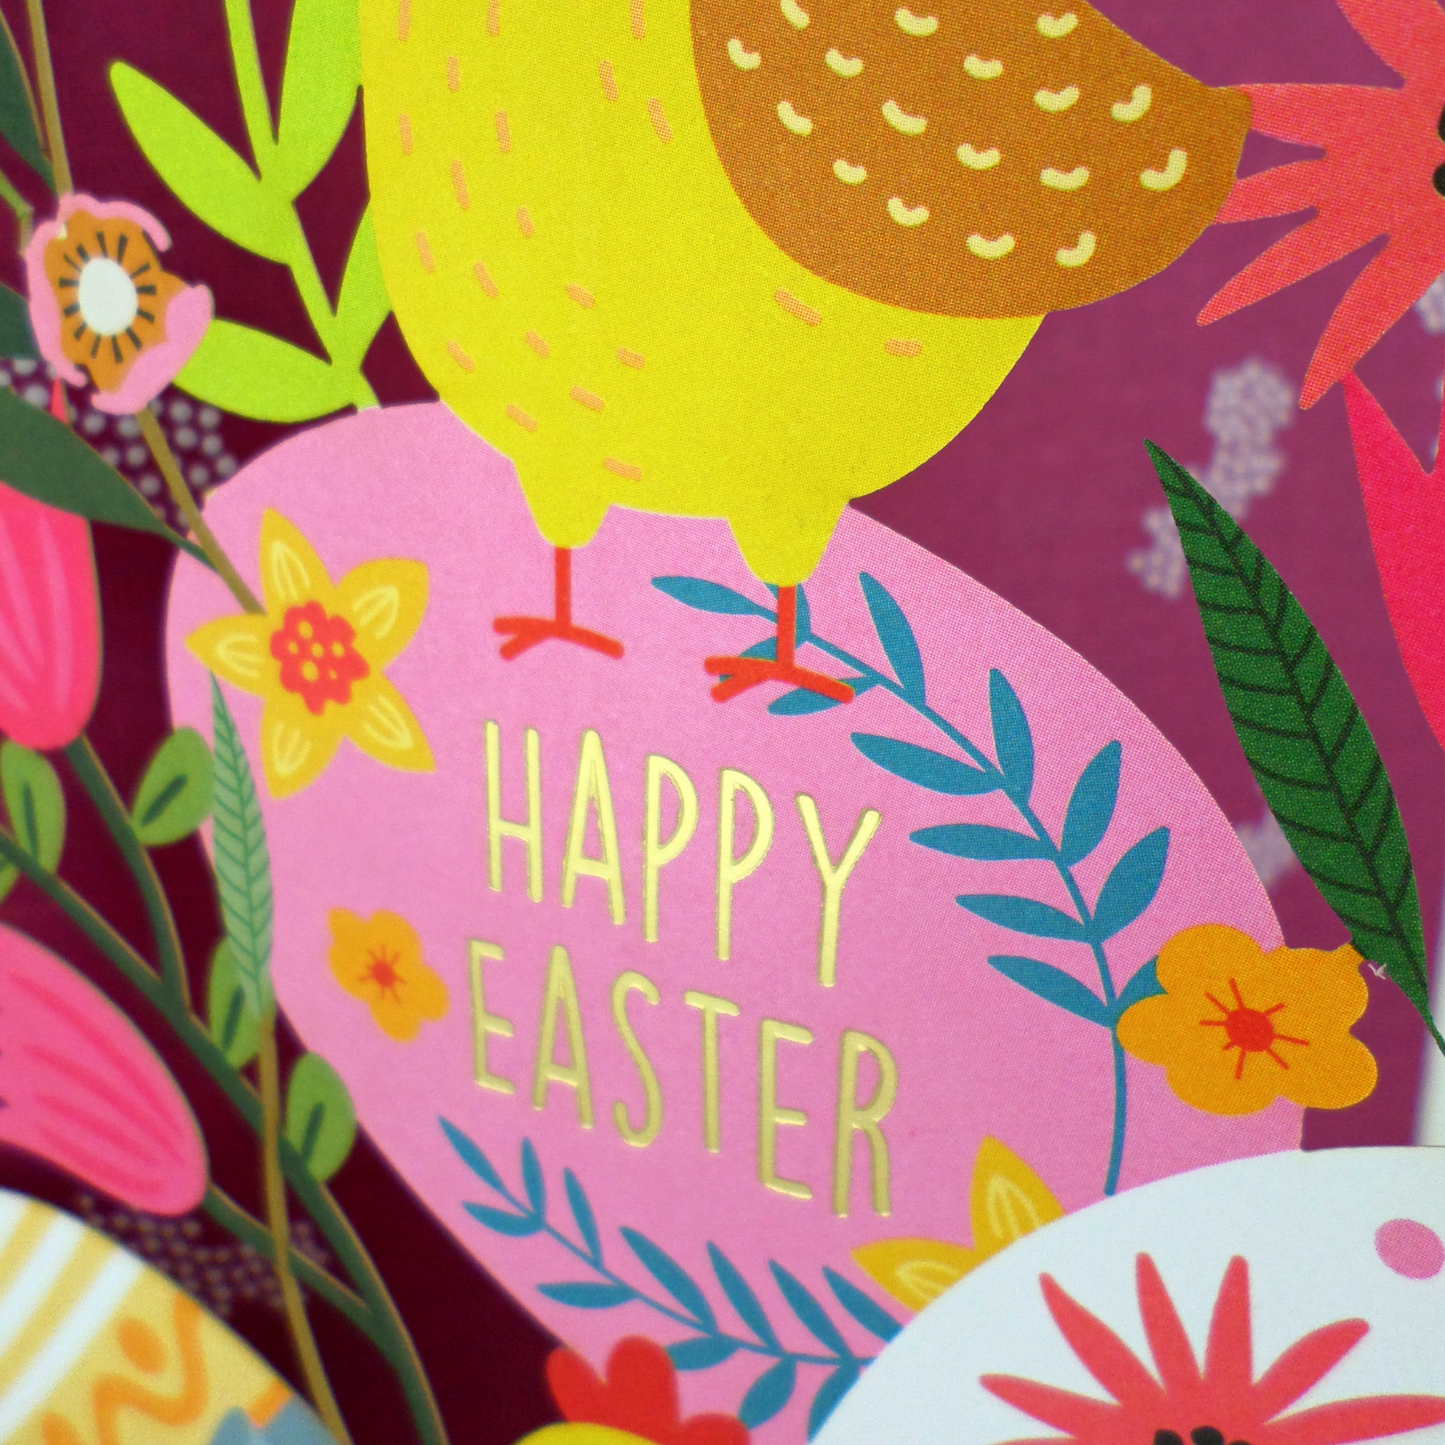 Paper Cut Art Happy Easter Chick Hatching Easter Greeting Card